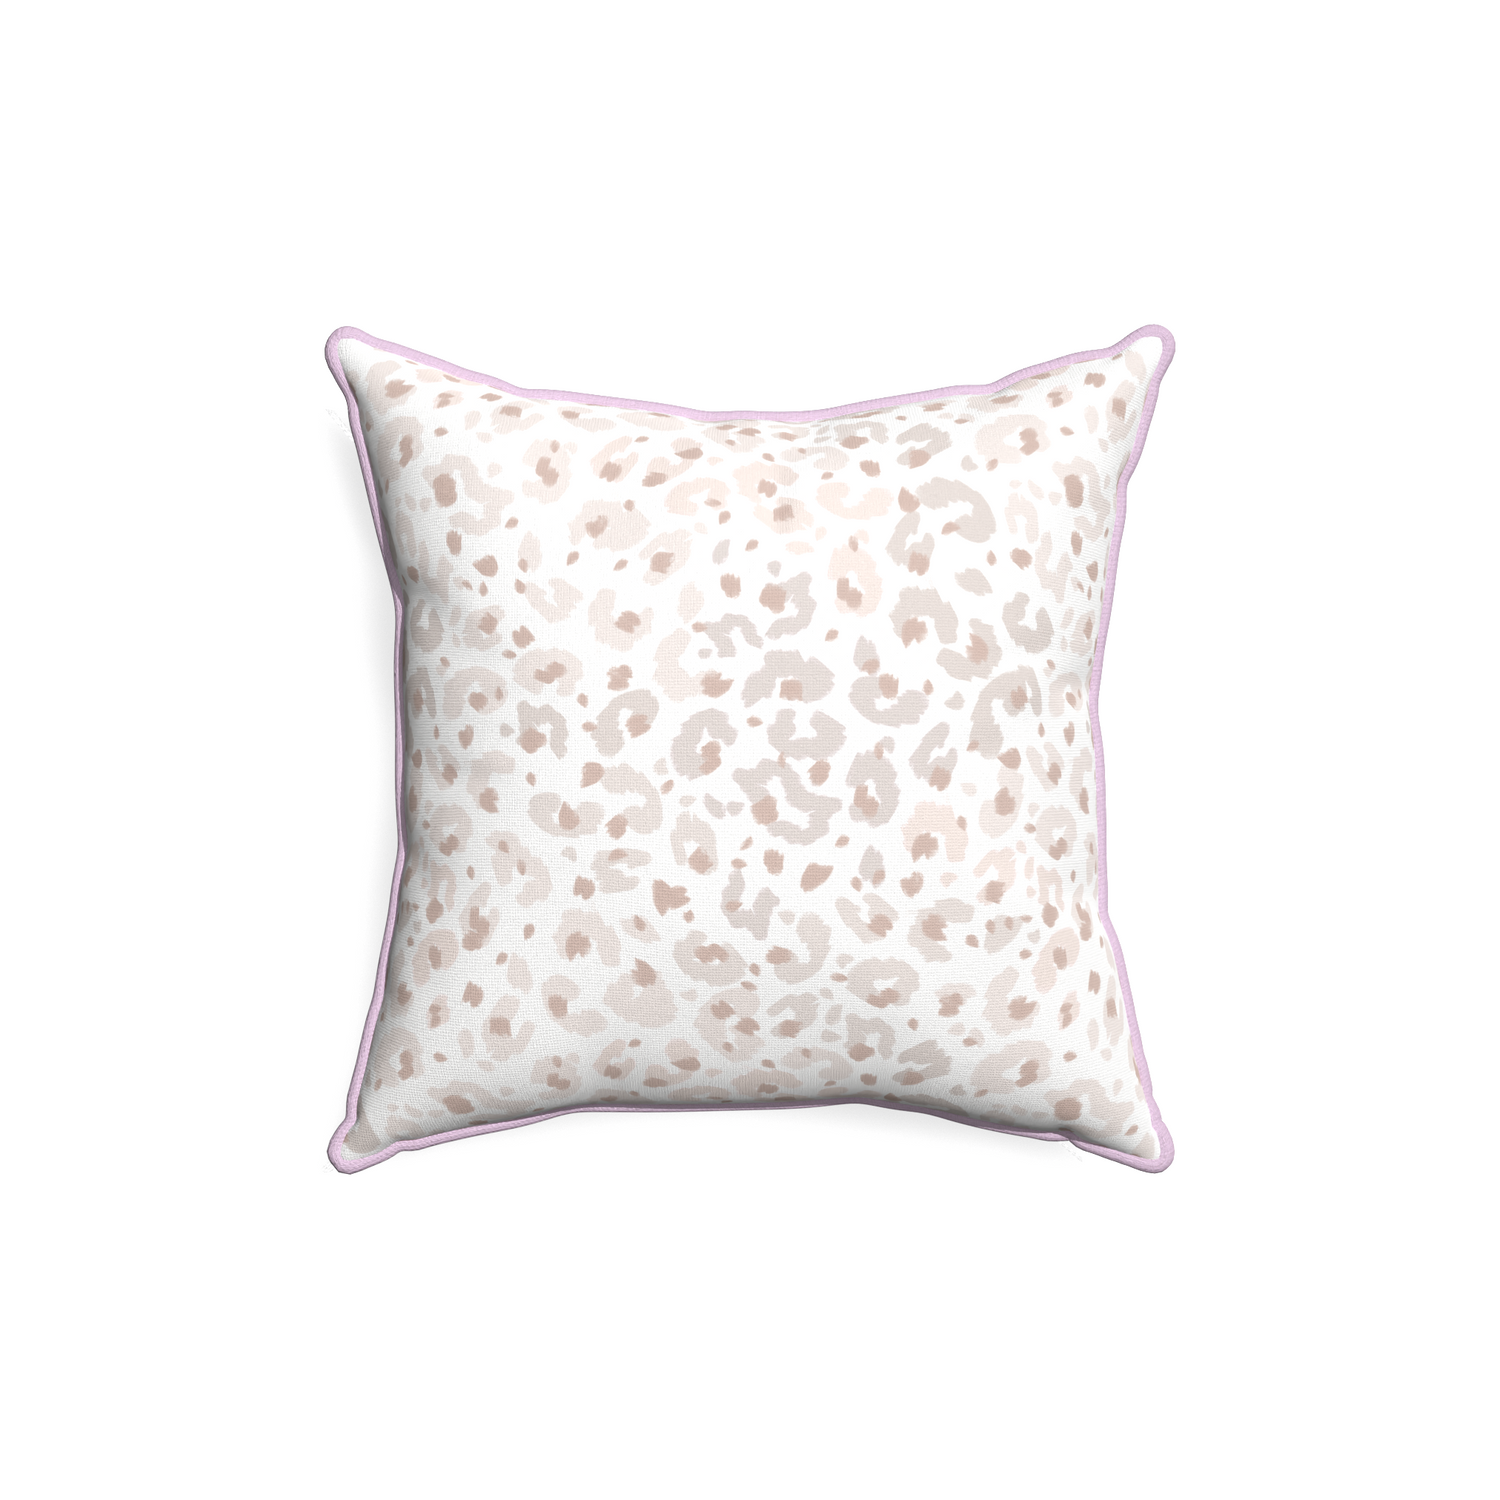 18-square rosie custom beige animal printpillow with l piping on white background